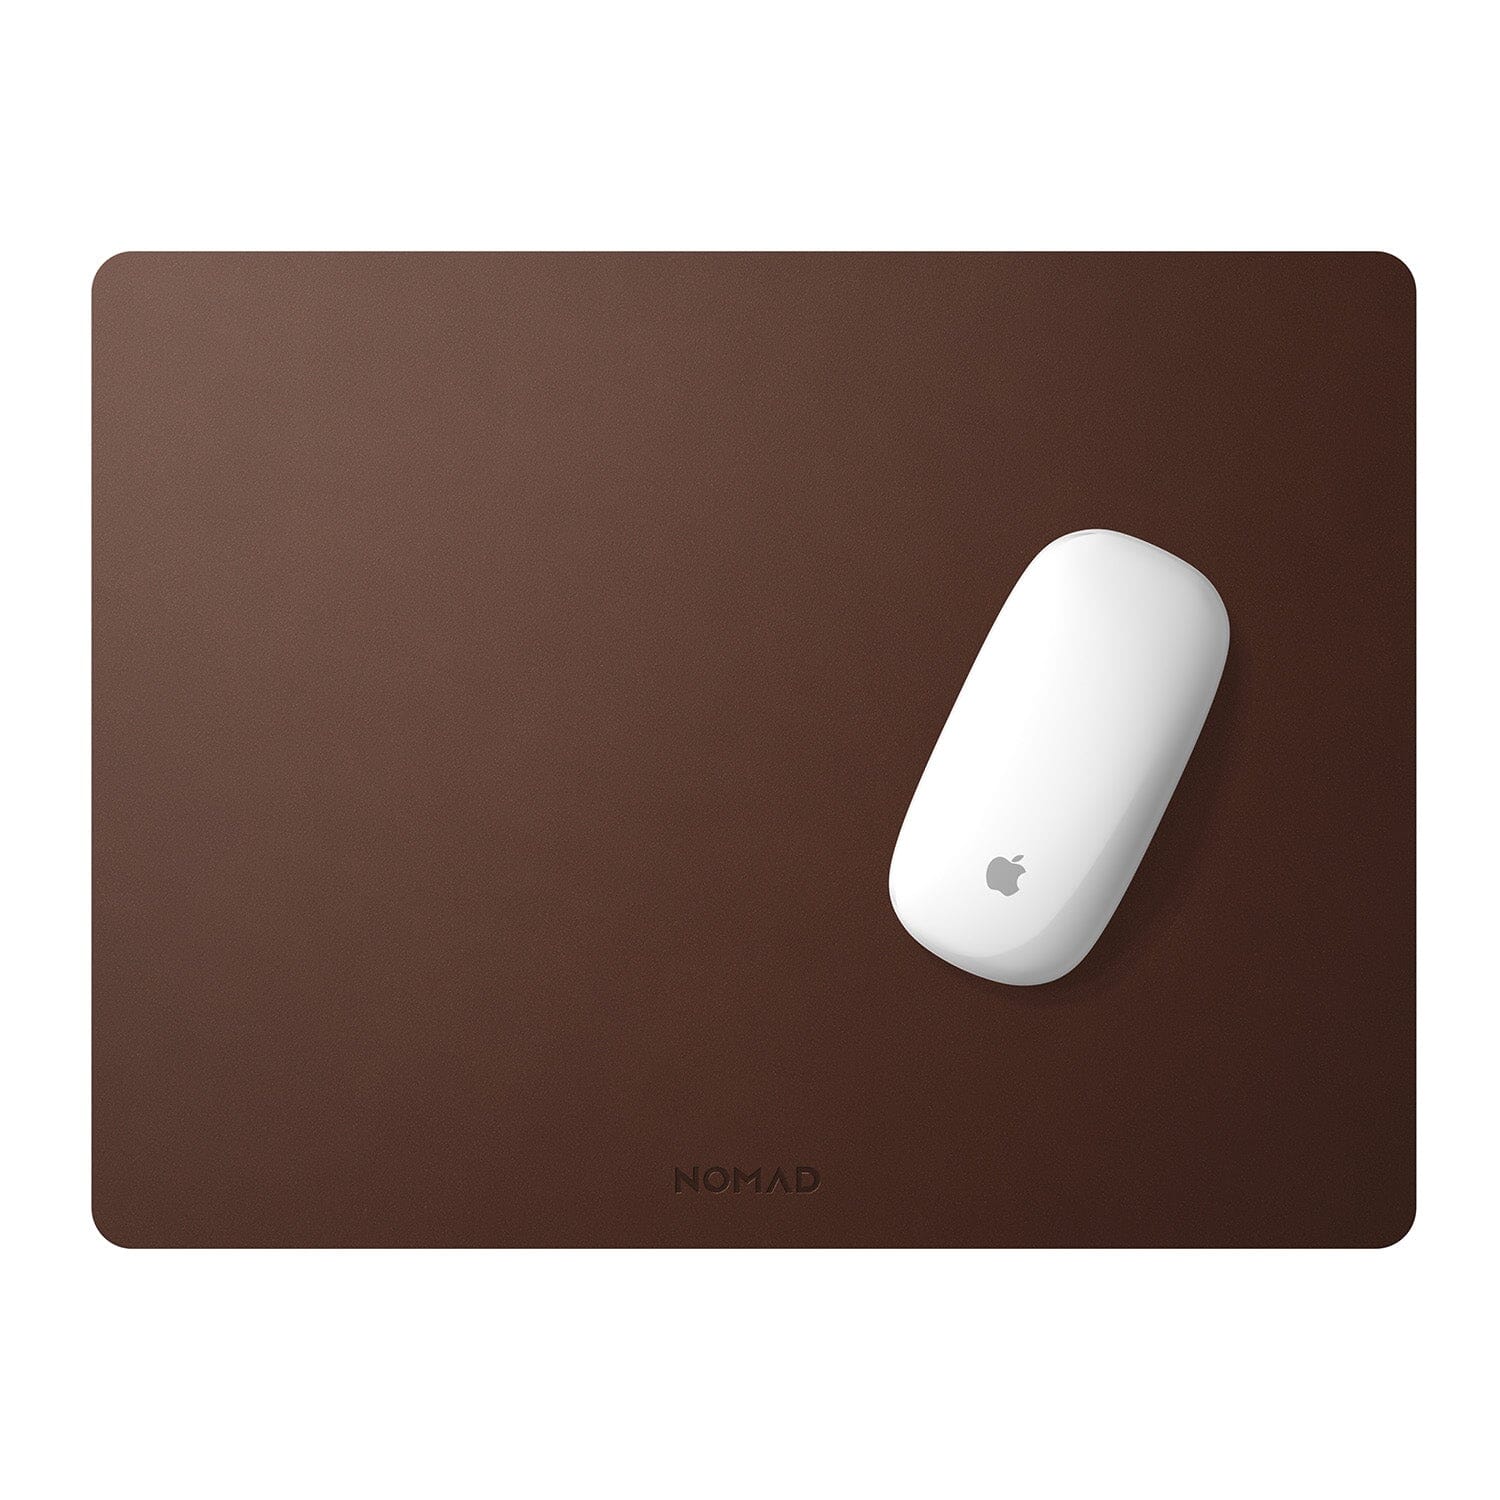 NOMAD Horween® Leather Mousepad 16" NOMAD Rustic Brown 